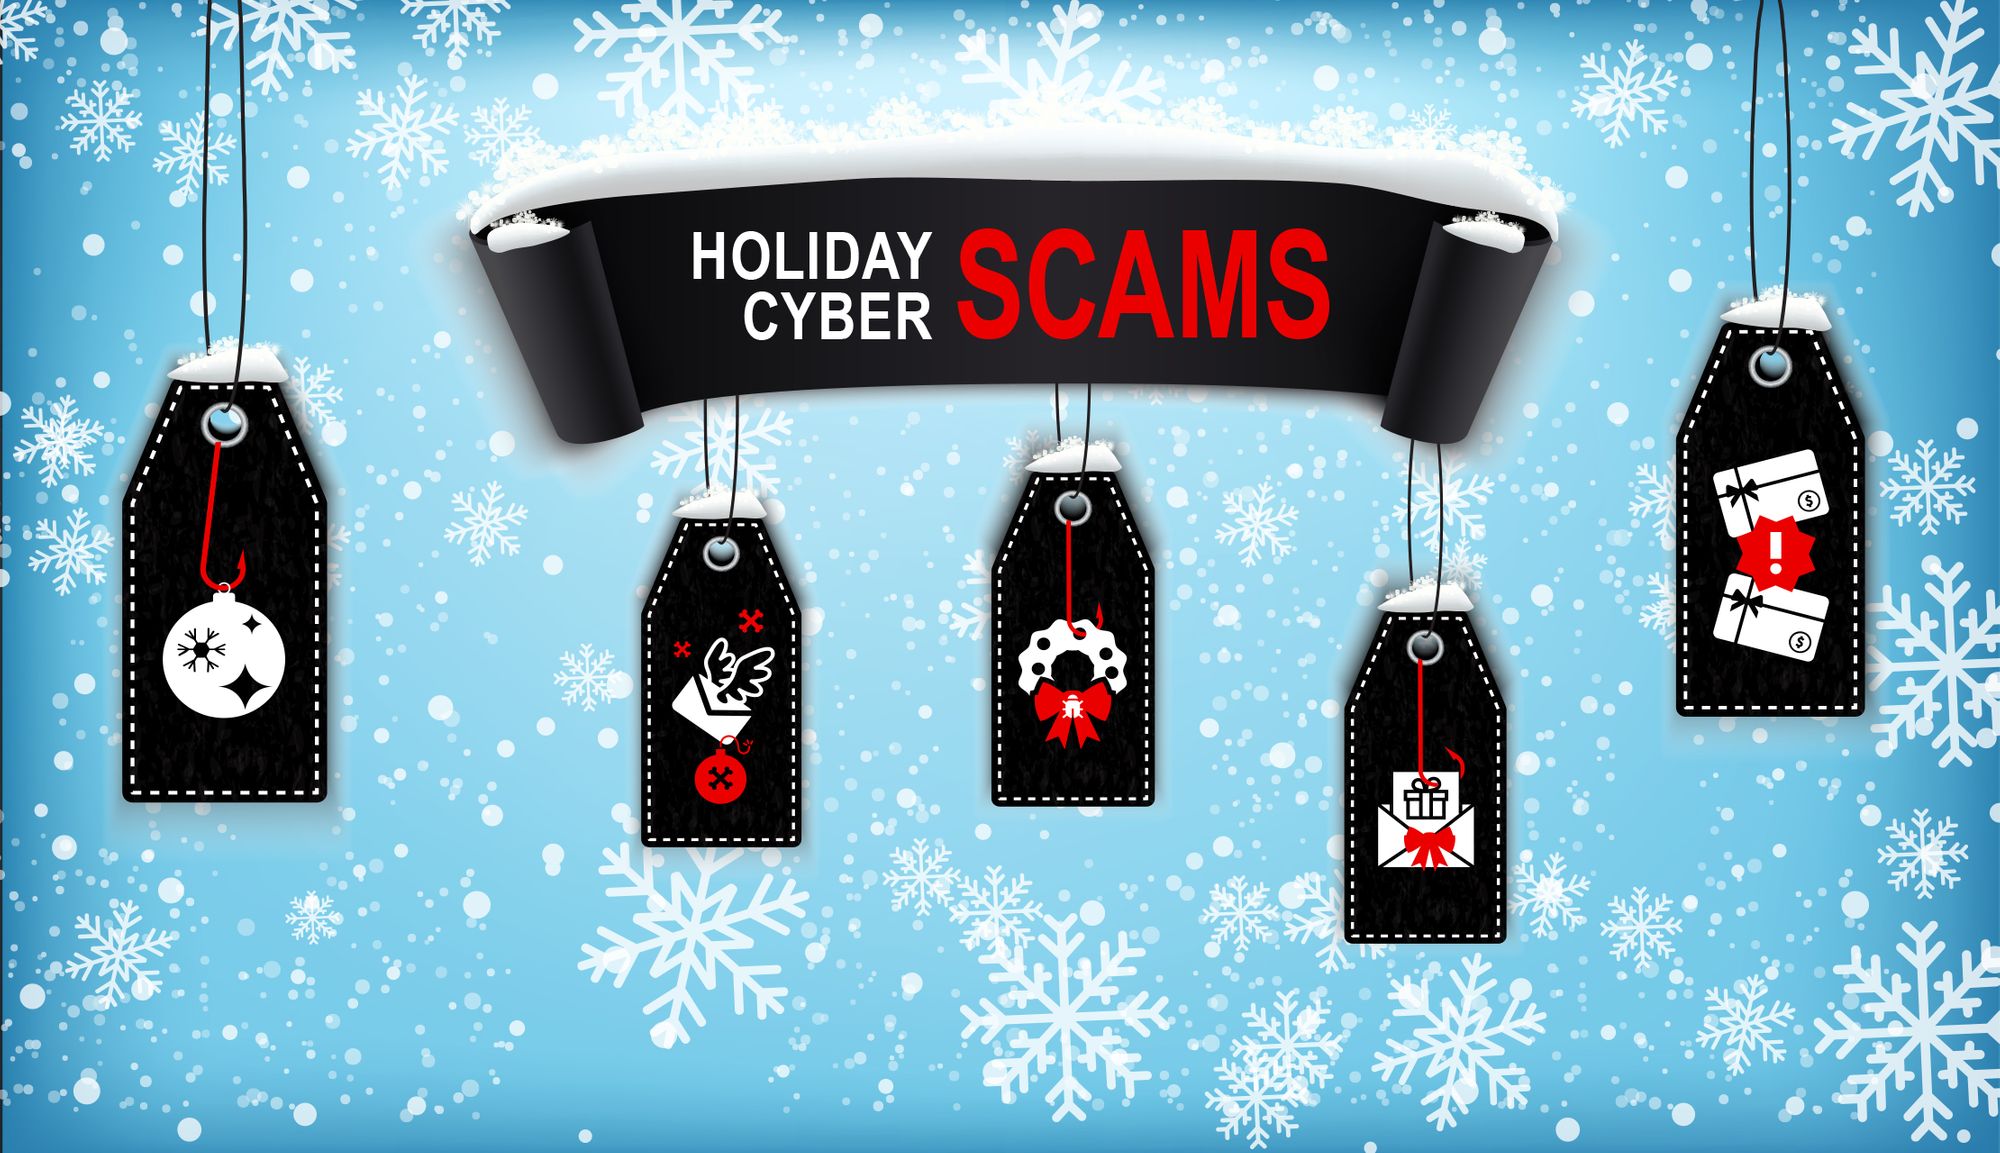 holiday-scams-1639380409.jpg